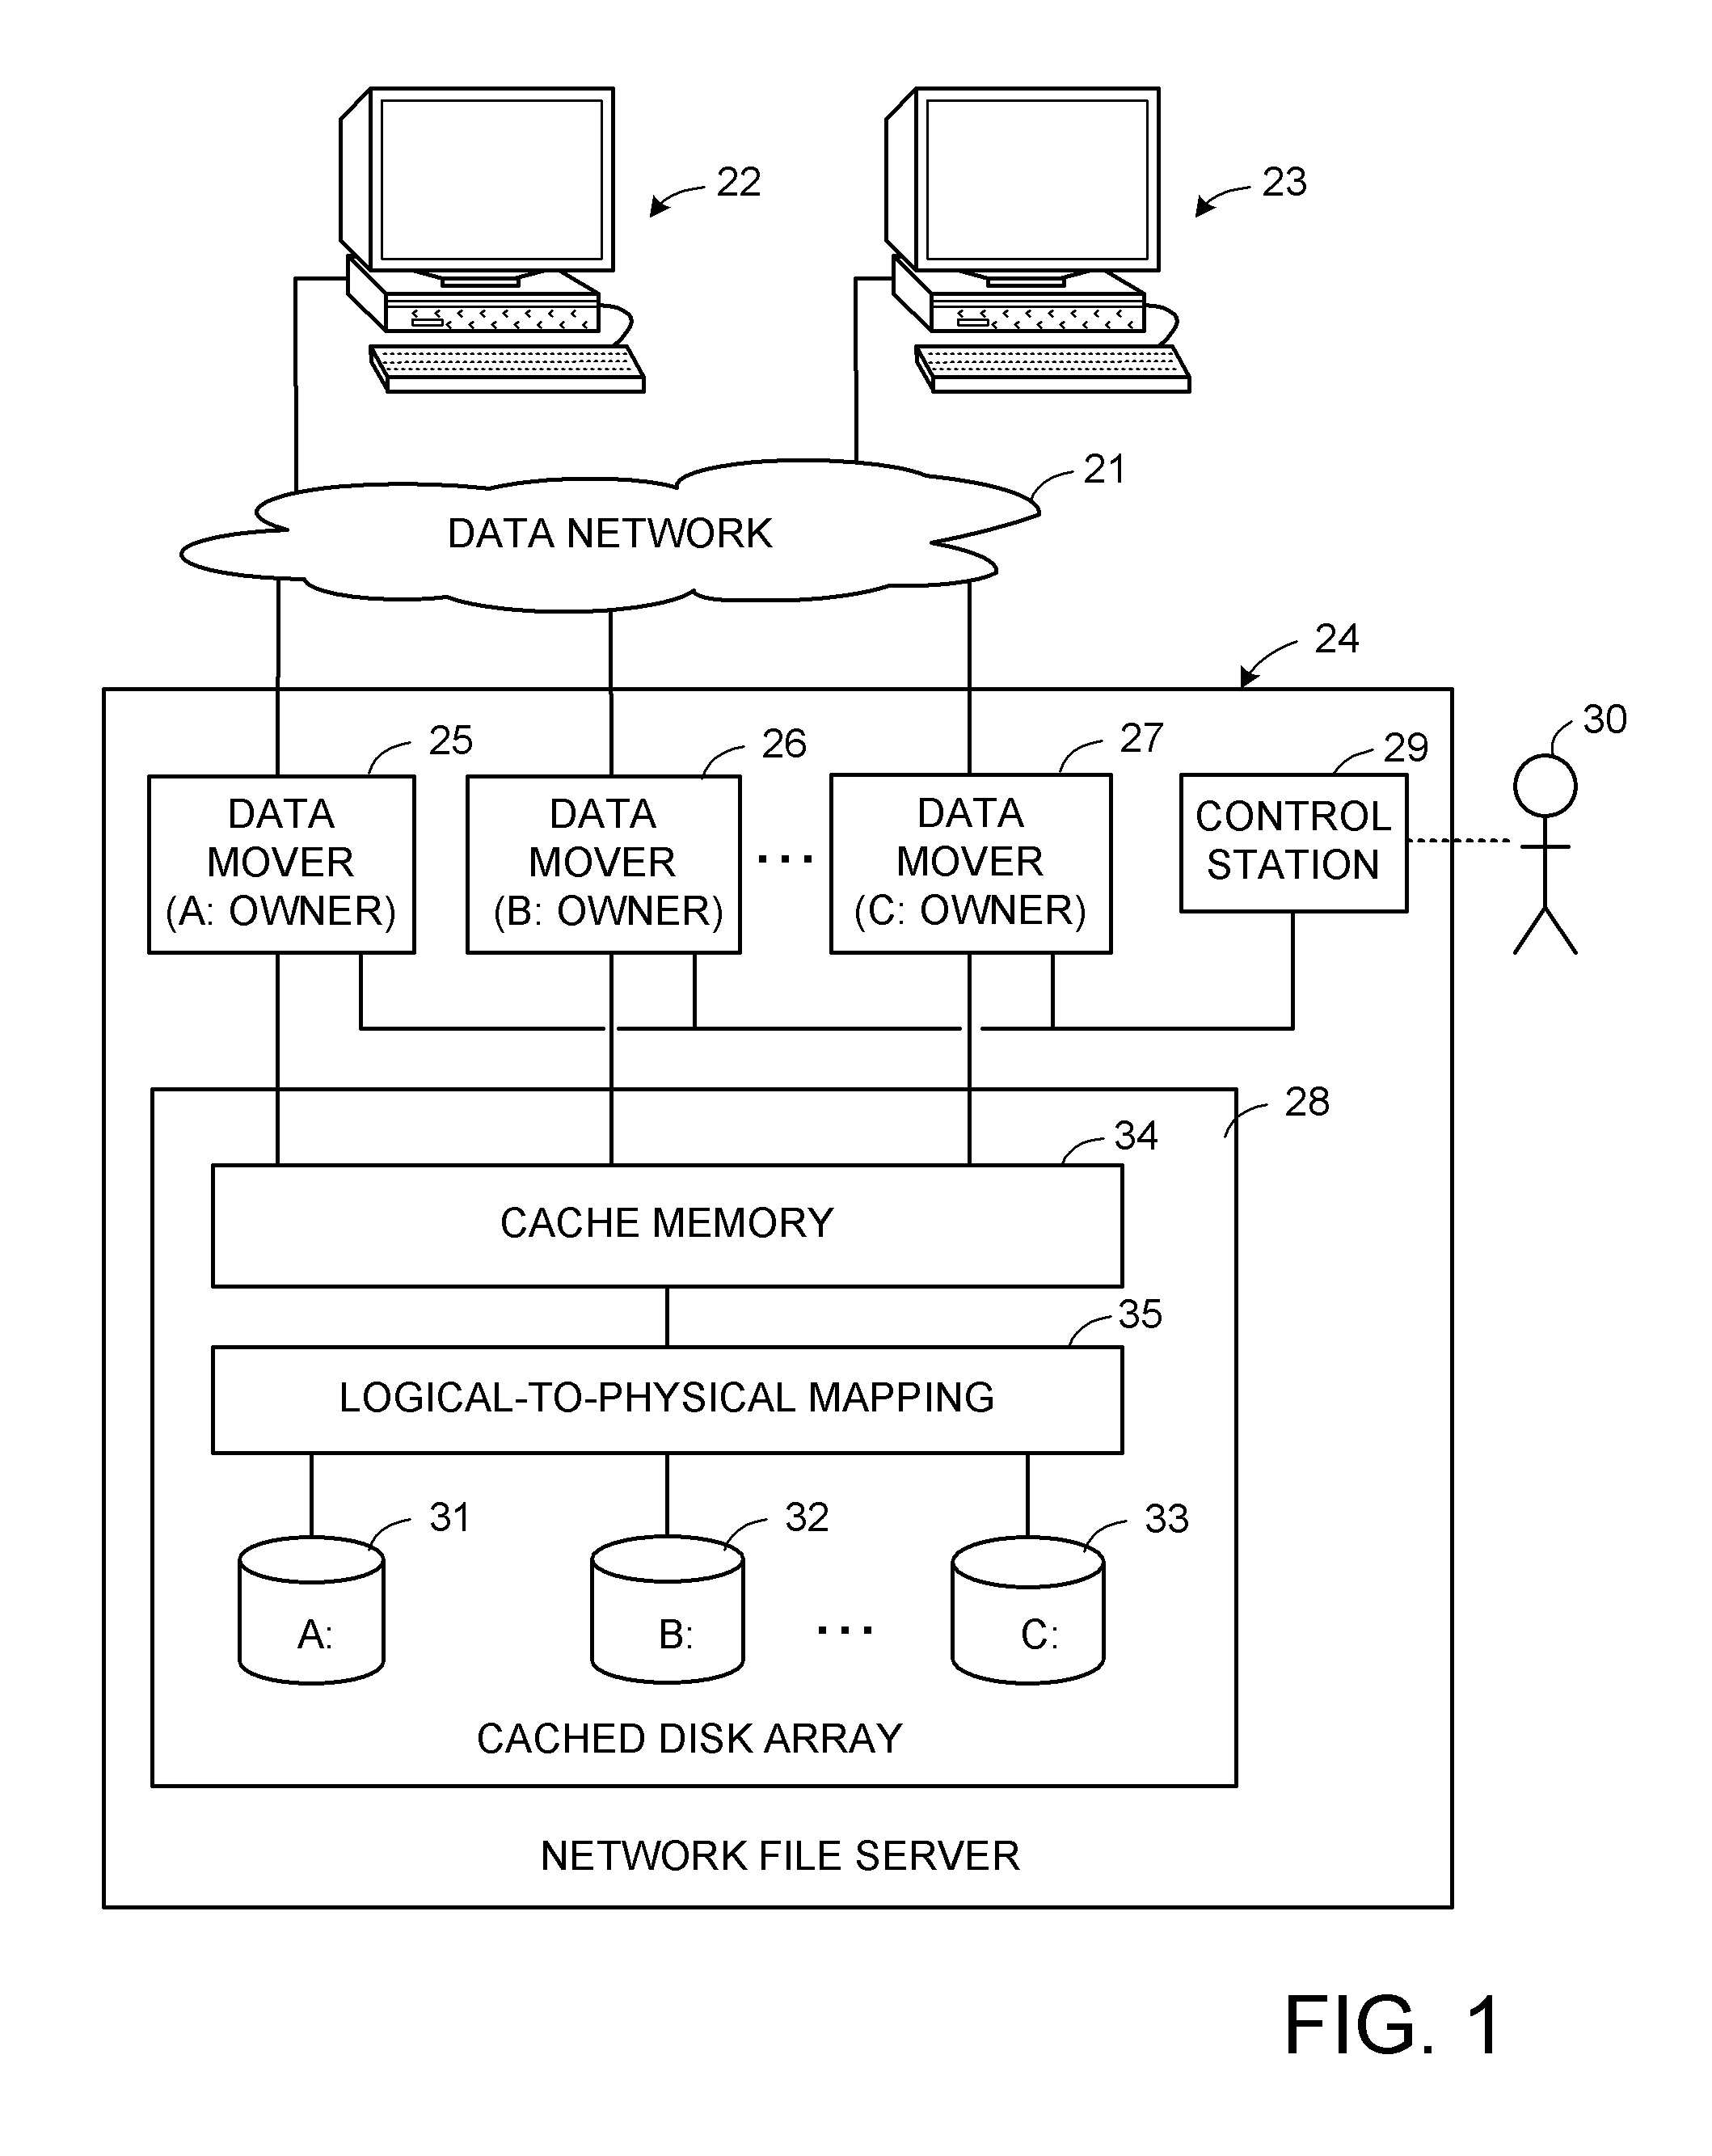 Distributed maintenance of snapshot copies by a primary processor managing metadata and a secondary processor providing read-write access to a production dataset